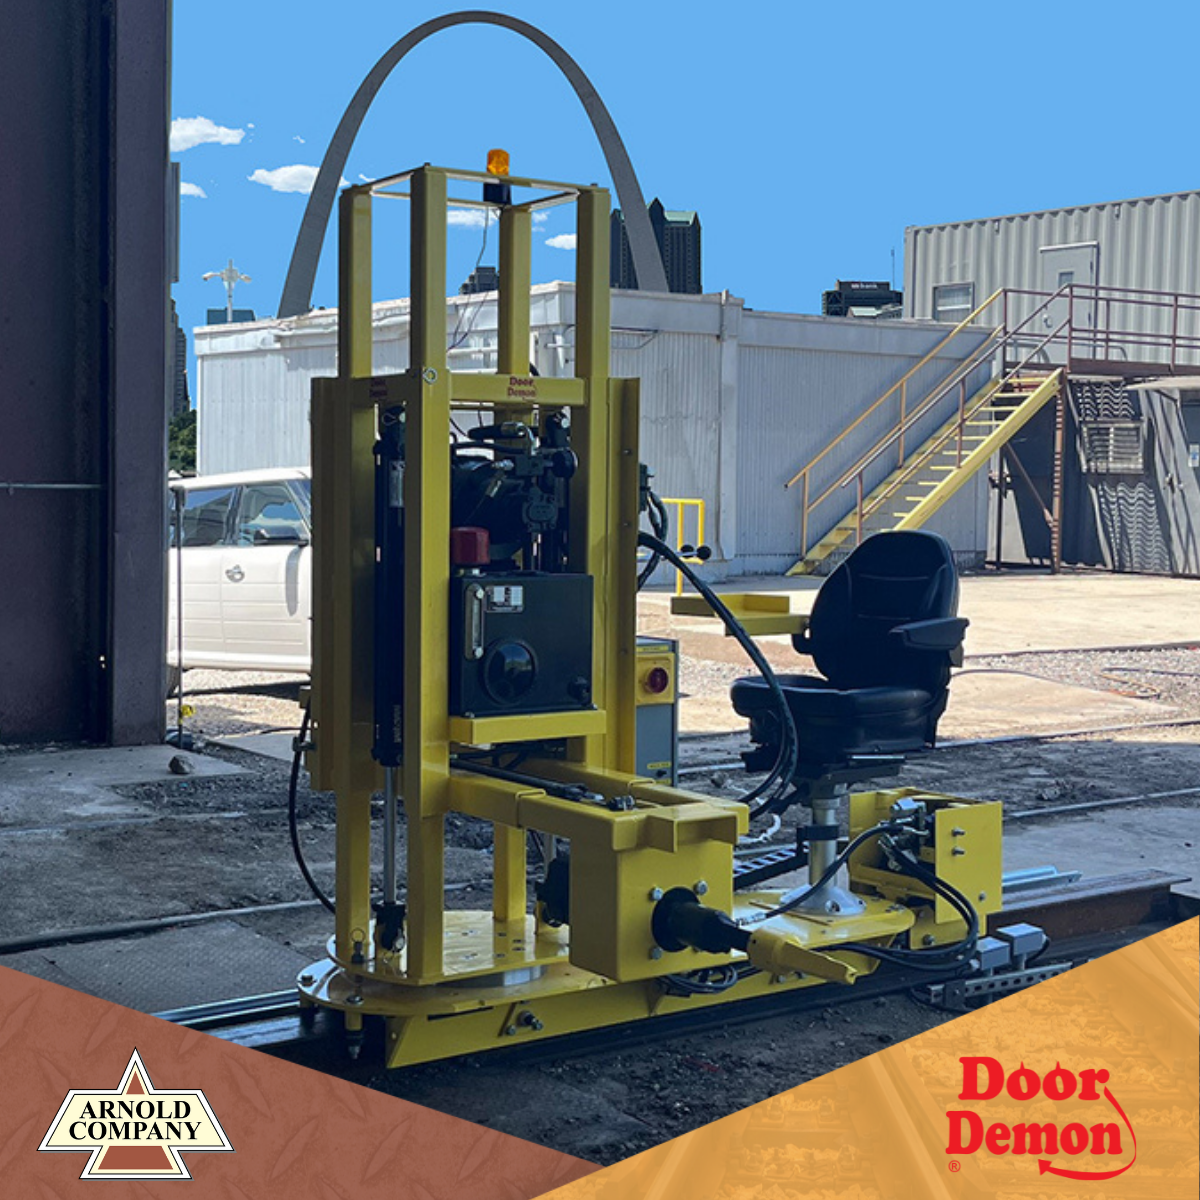 Arnold Company | Door Demon | Safety and Productivity Solutions